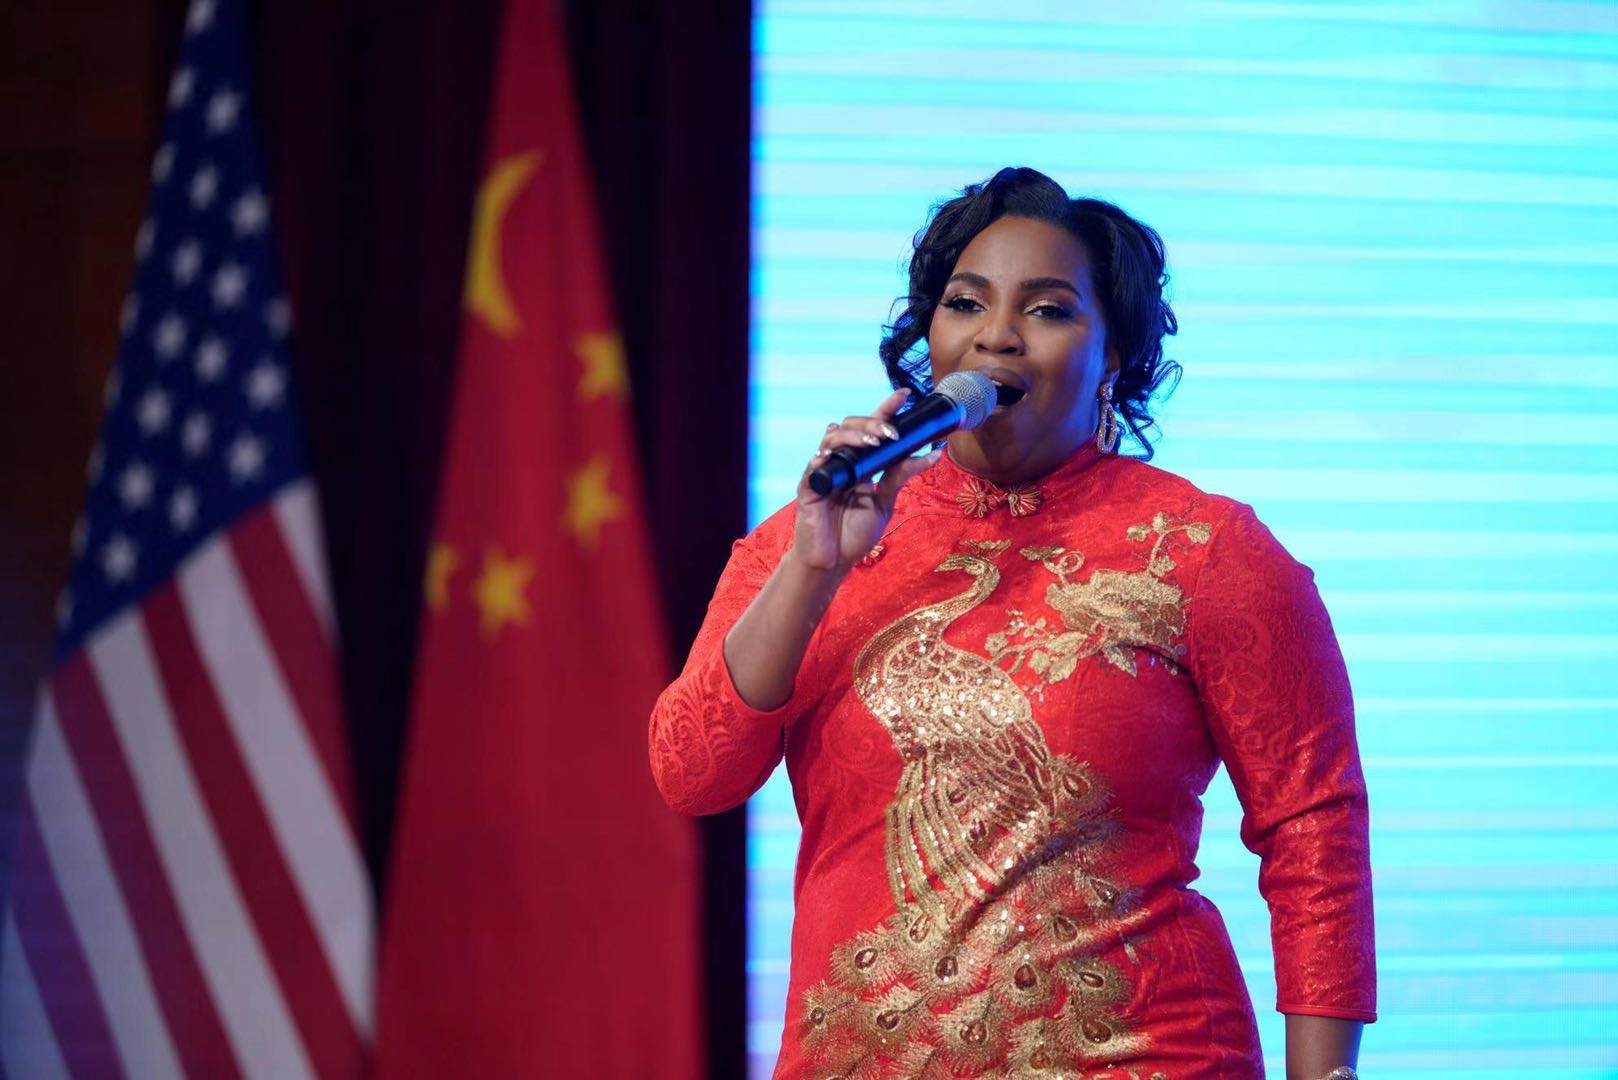 Mary performed for the 40th Anniversary of U.S.-China Student Exchanges at the Embassy of the People’s Republic of China in Washington, D.C.